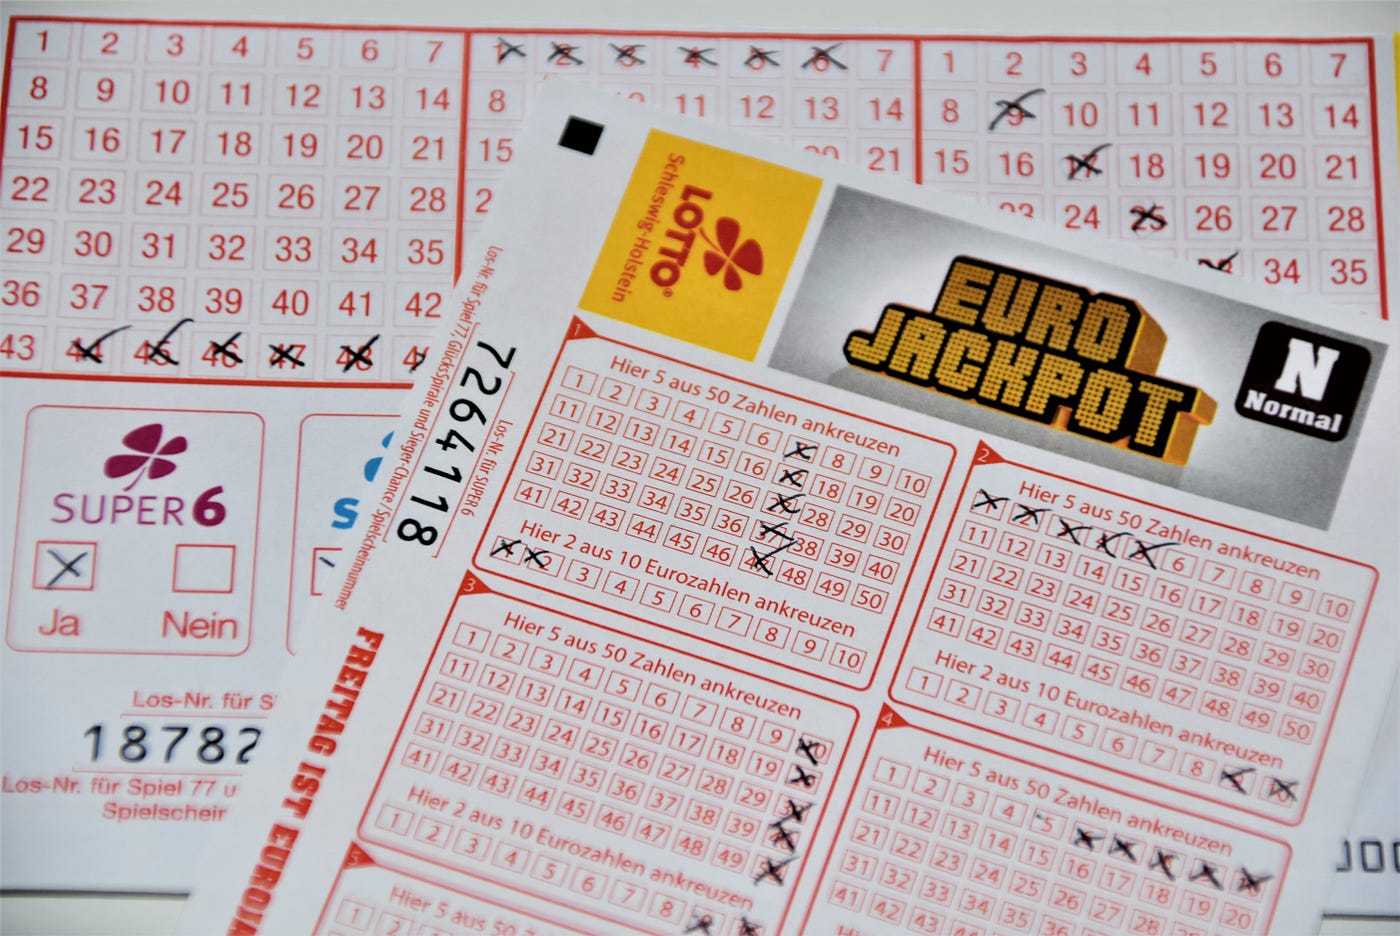 Lucky Win Lottery Result Today: Check Lucky Win Lotto Lottery Result,  Lottery Draw Timings, Lucky Win Lott, and Lucky Win Lott Chart - News